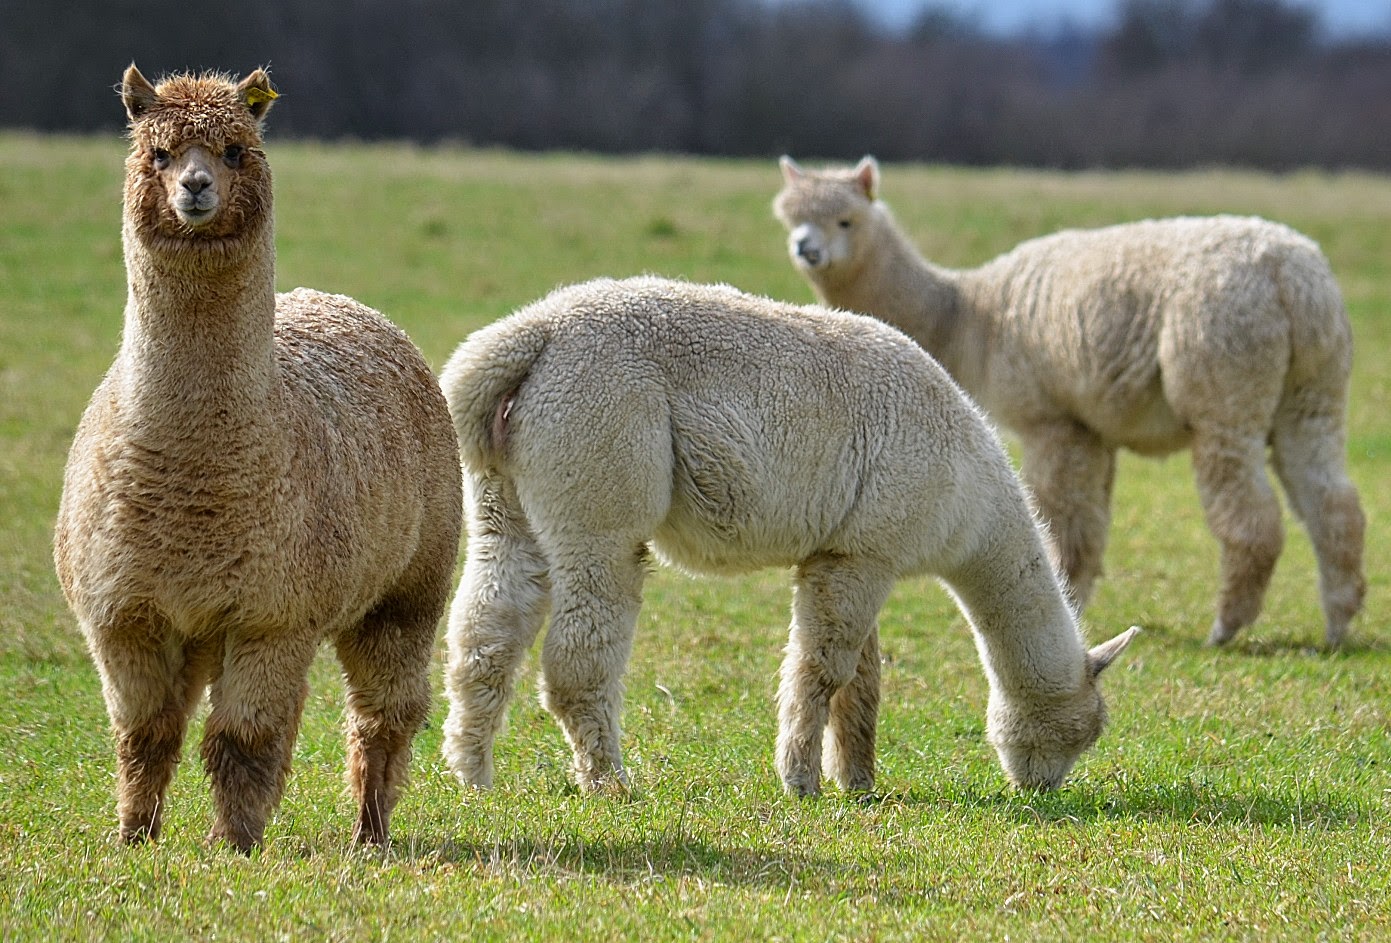 Can You Name These Animals? 14 Llama